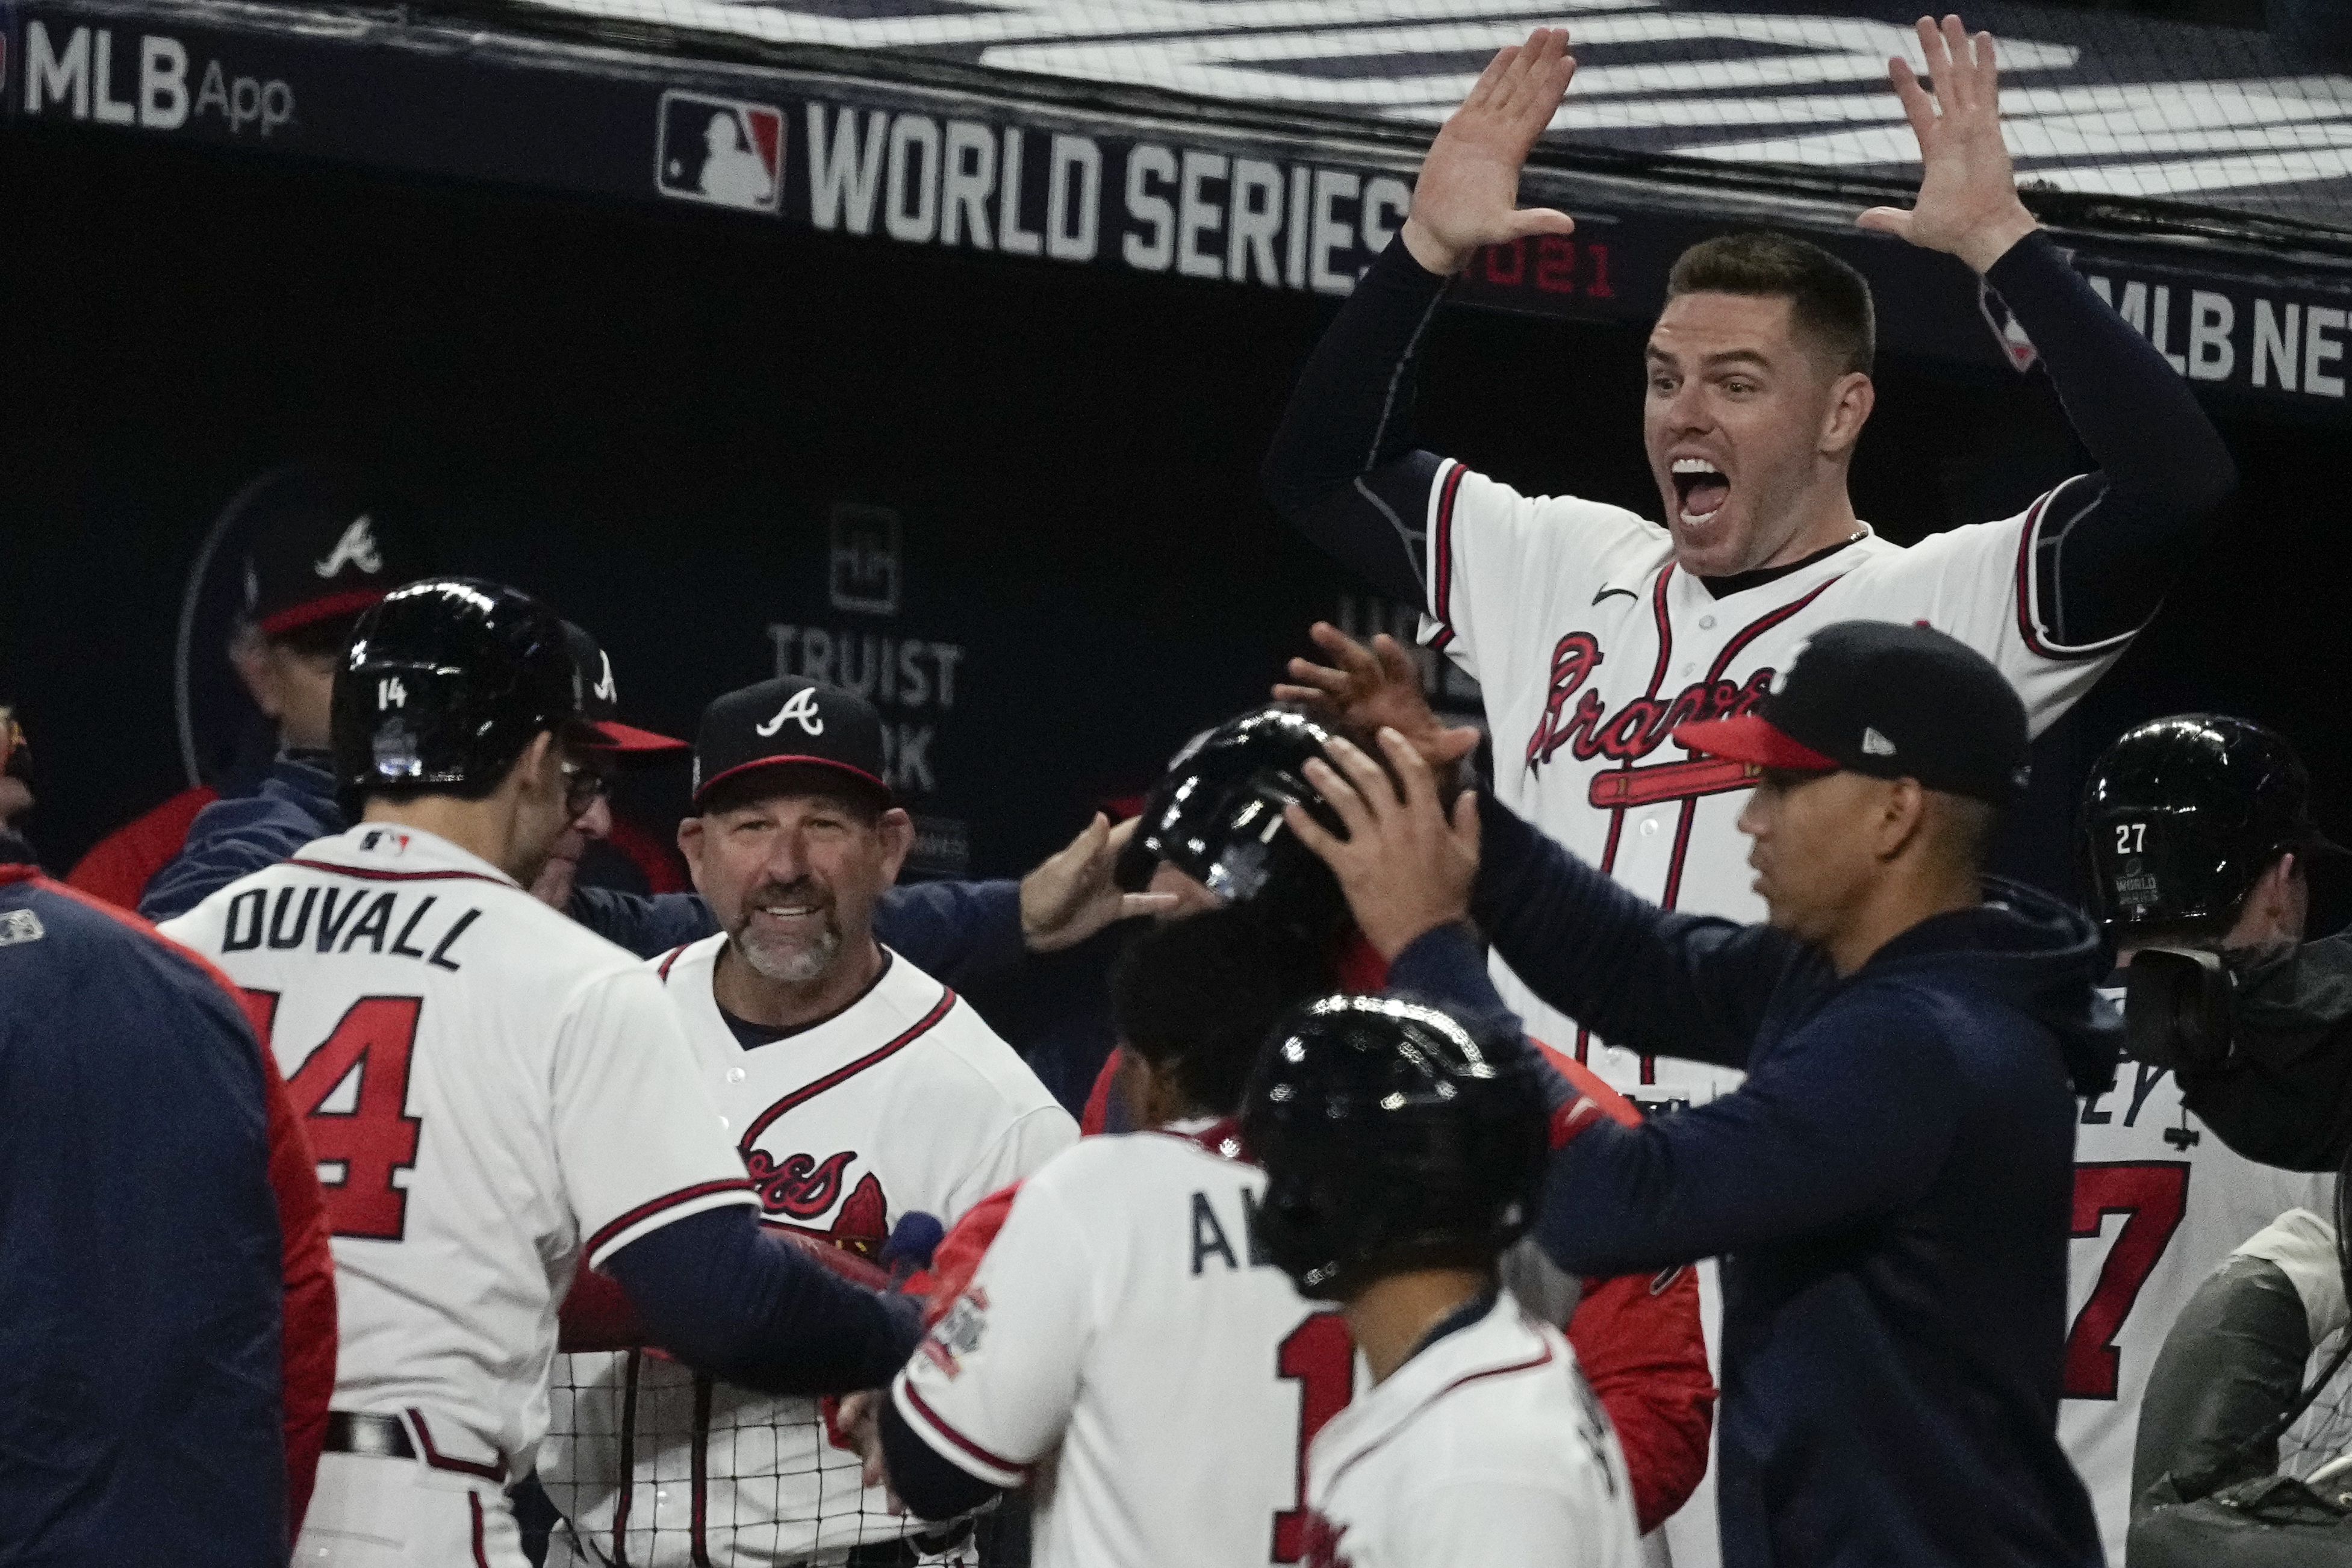 Planning a party for the Braves, News